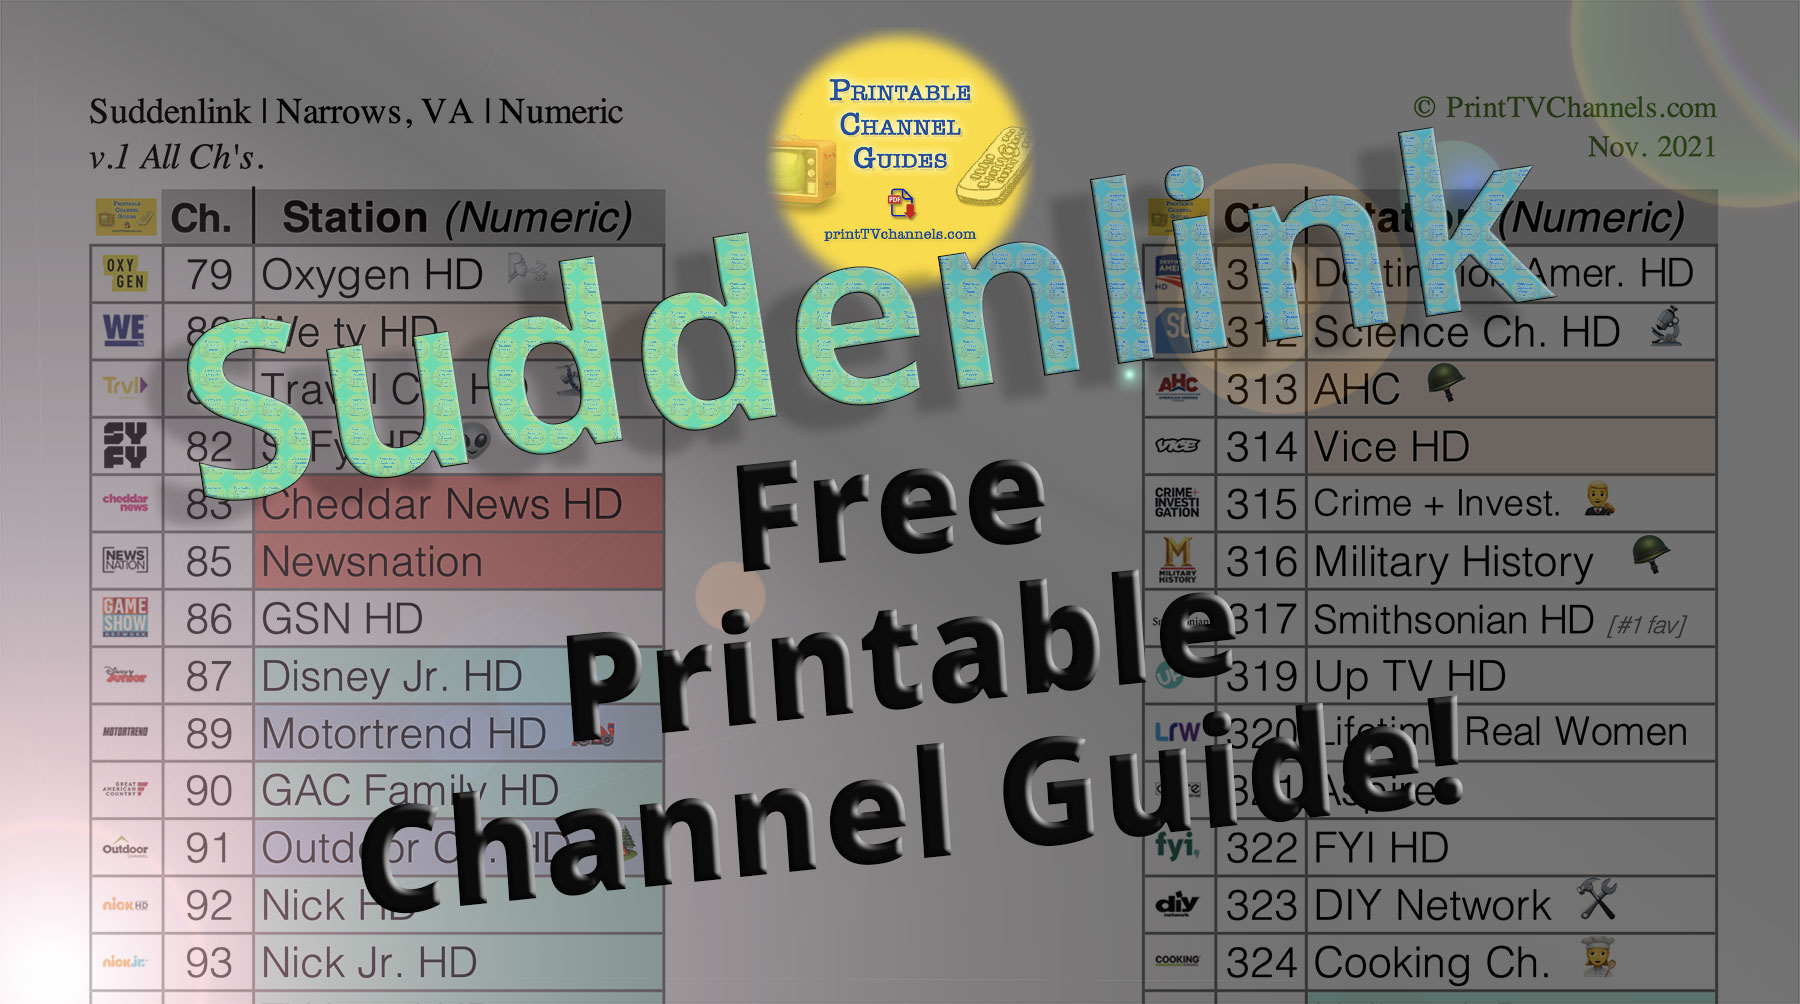 Suddenlink Channel Guide 2021 Printable PDF TV CHANNEL GUIDES